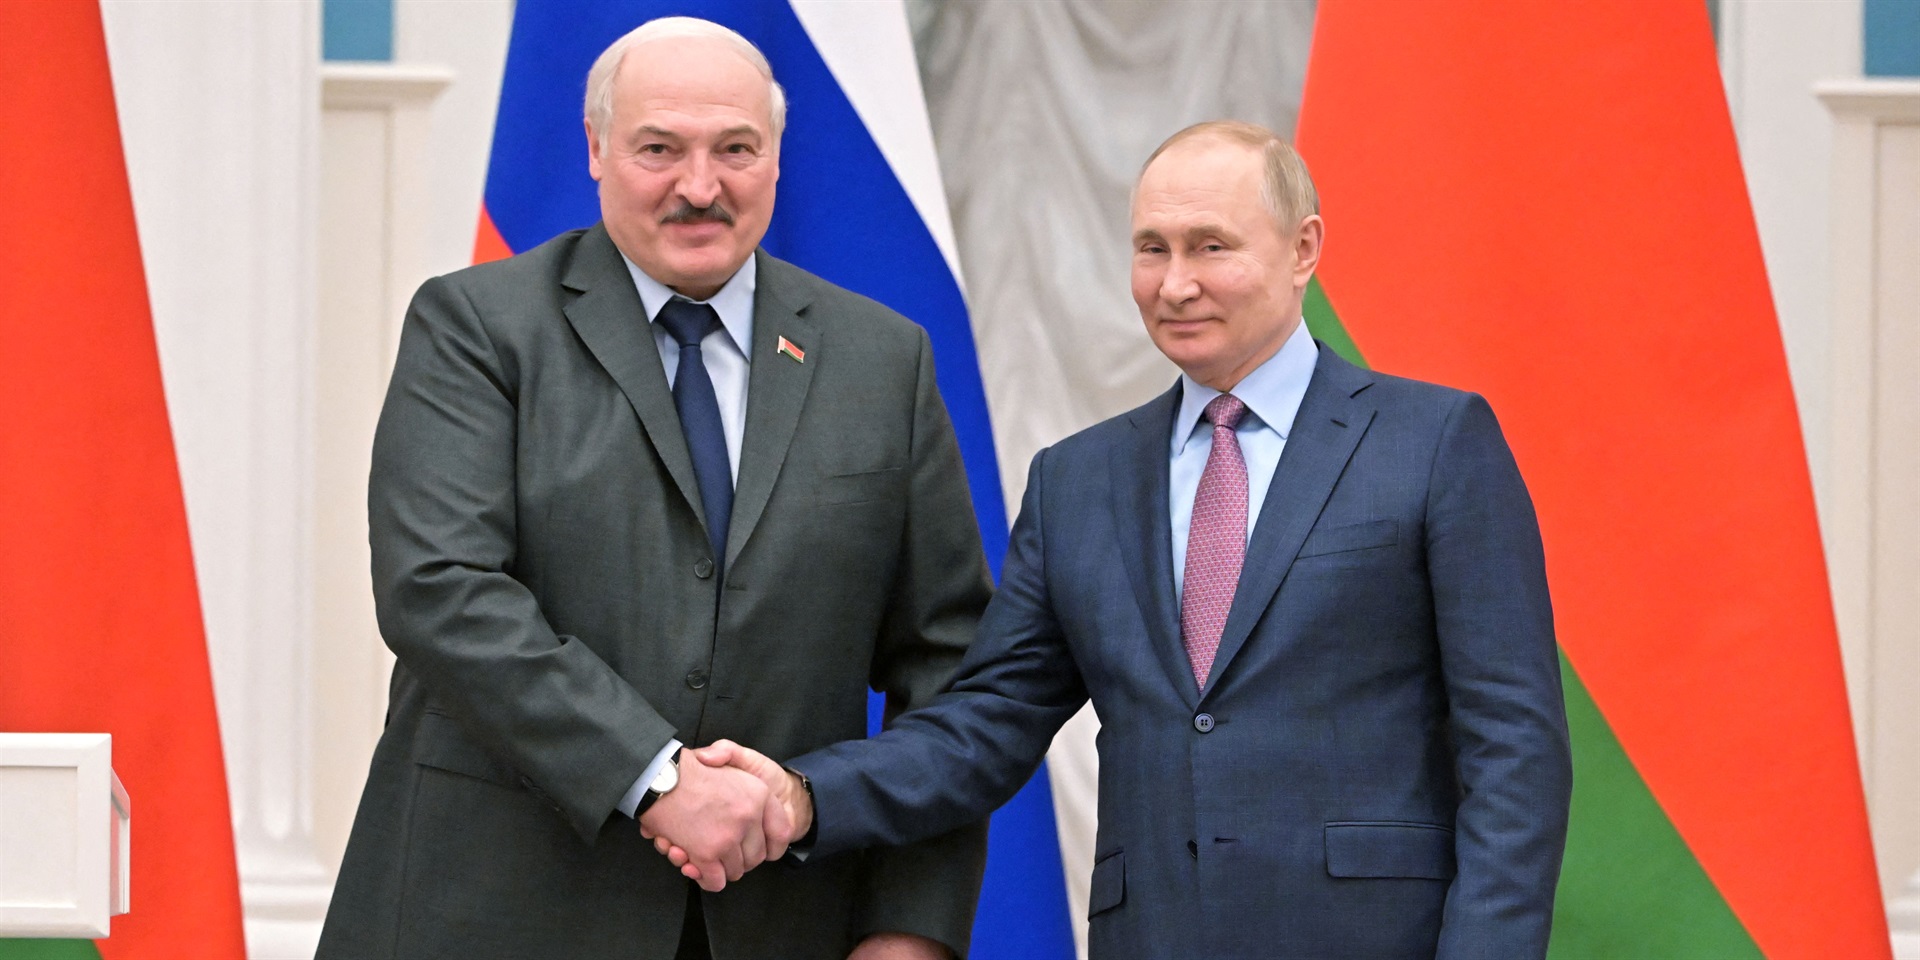 Russia's President Vladimir Putin (R) shakes hands with his Belarus counterpart Alexander Lukashenko (L) during a press conference following their talks at the Kremlin in Moscow on February 18, 2022. Sergei Guneyev/Sputnik/AFP/Getty Images